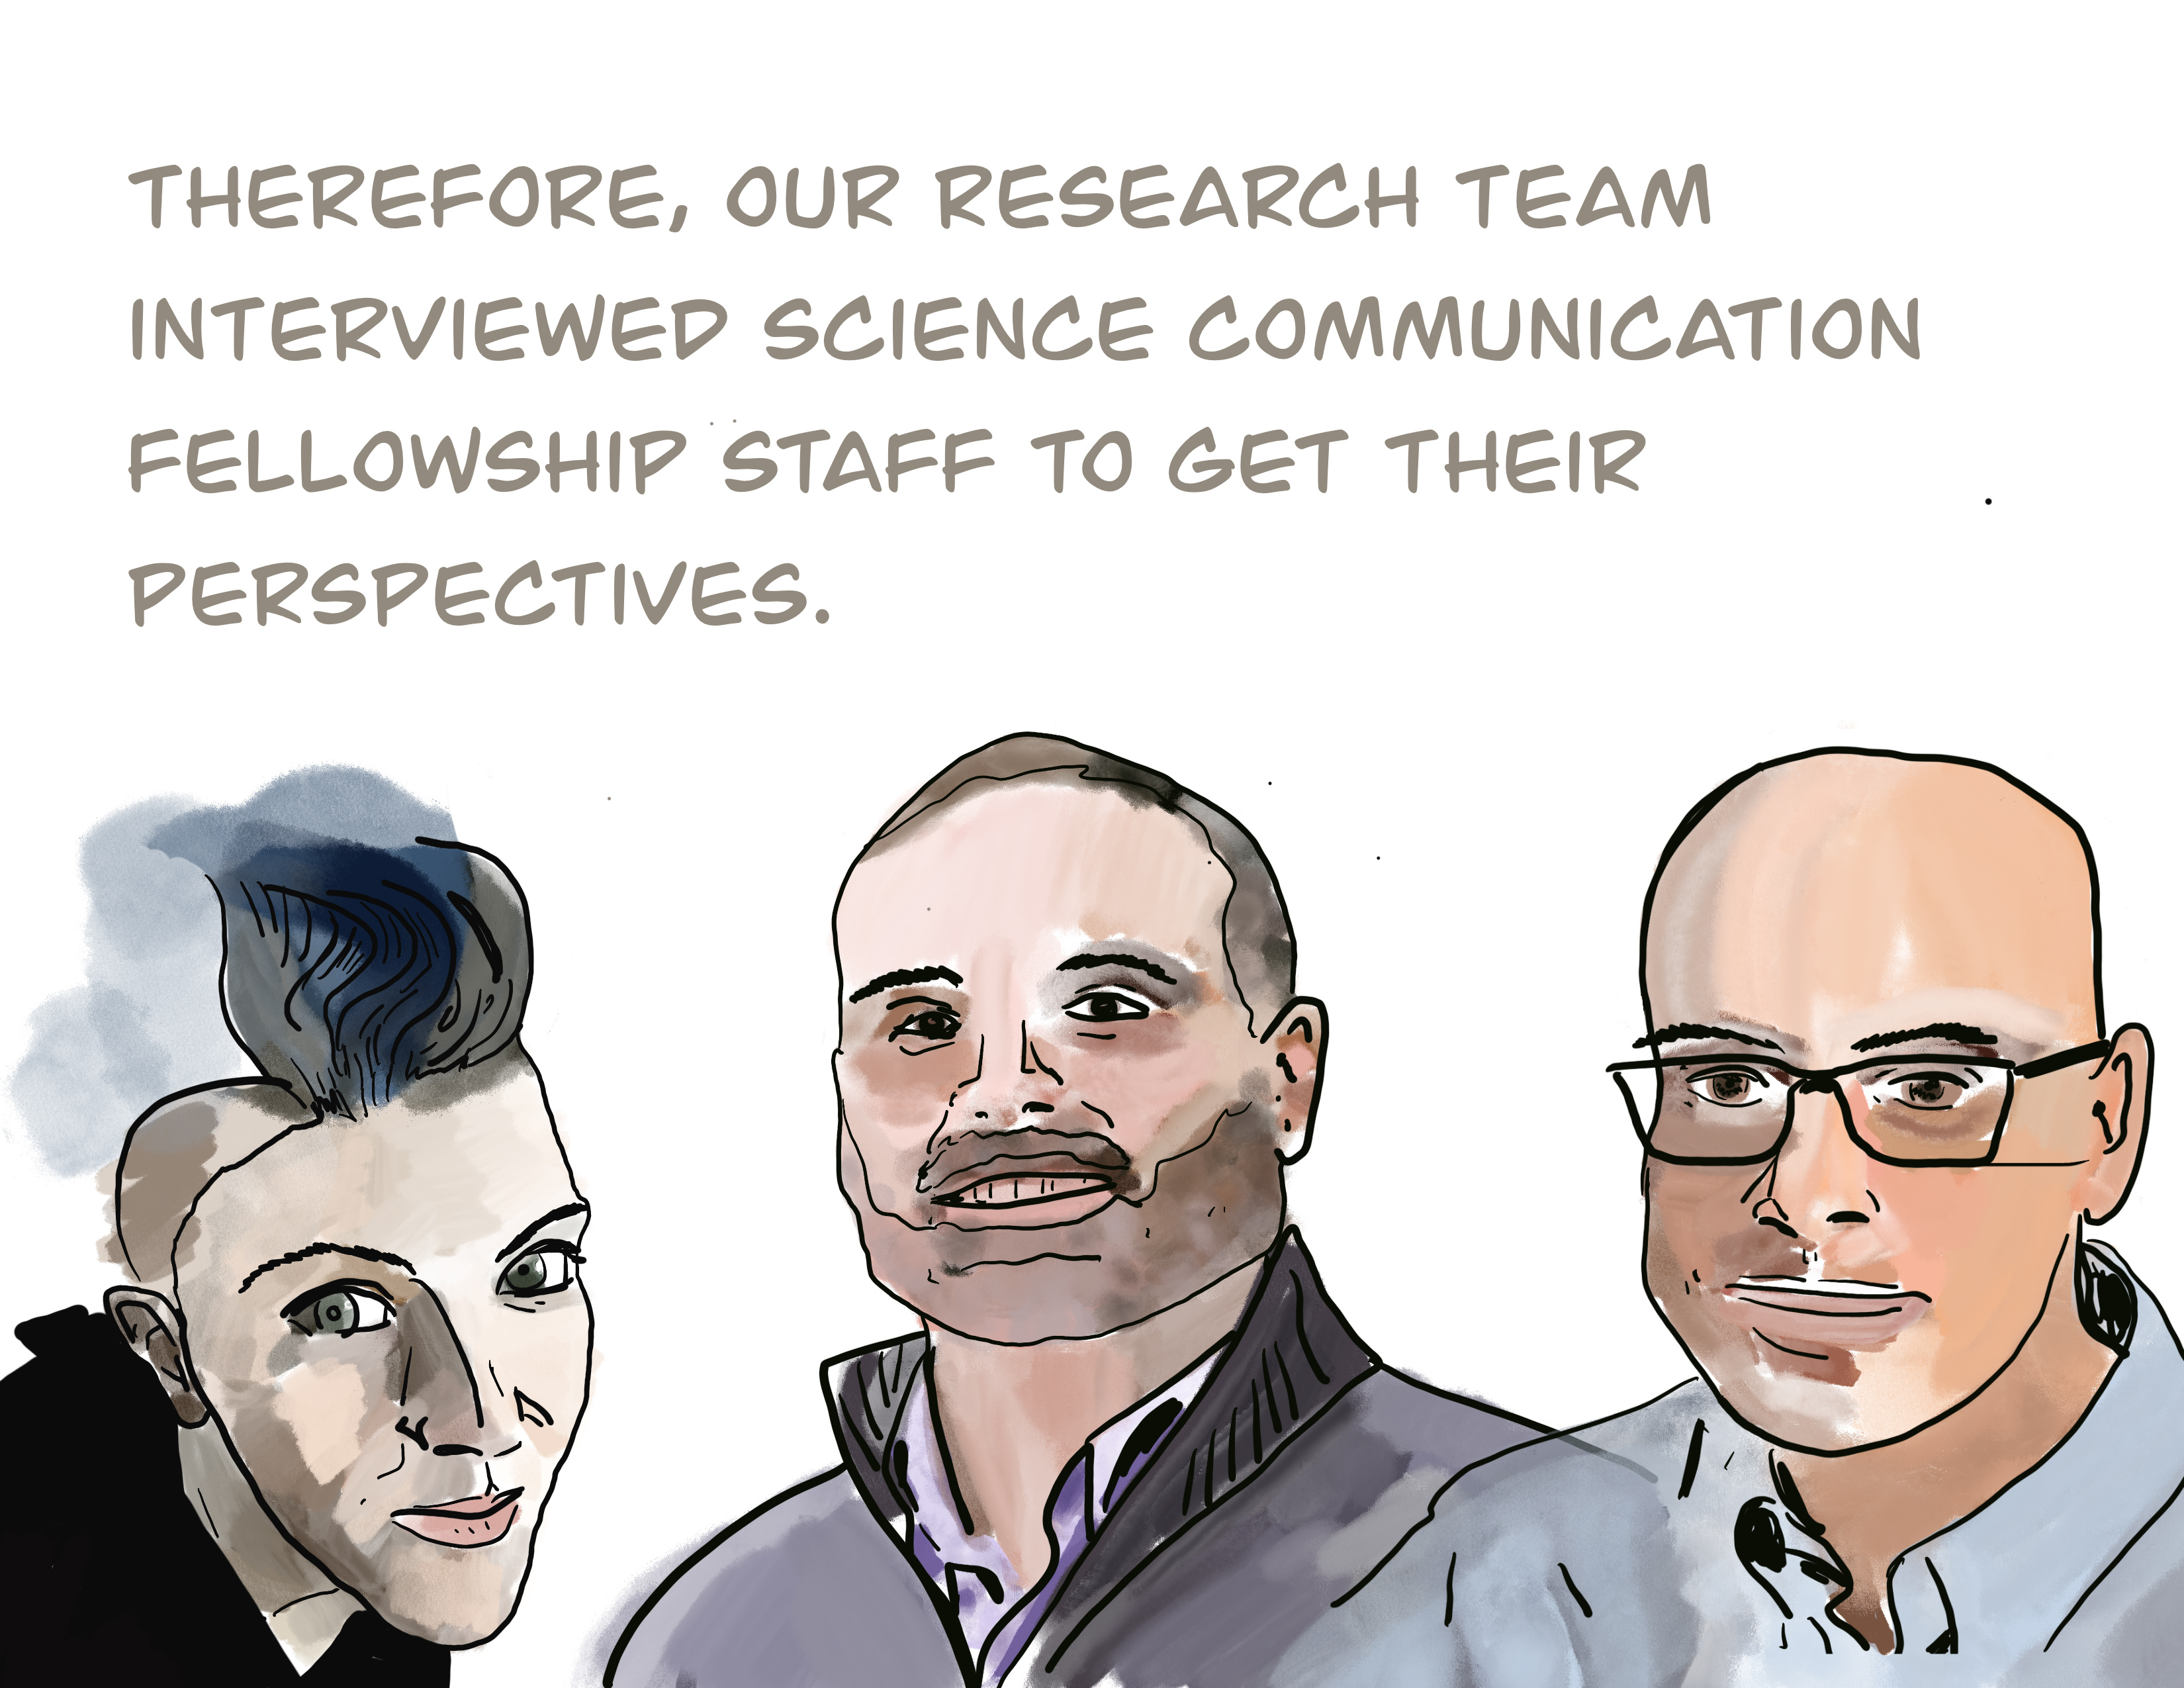 Therefore, our research team interviewed science communication fellowship staff to get their perspectives.